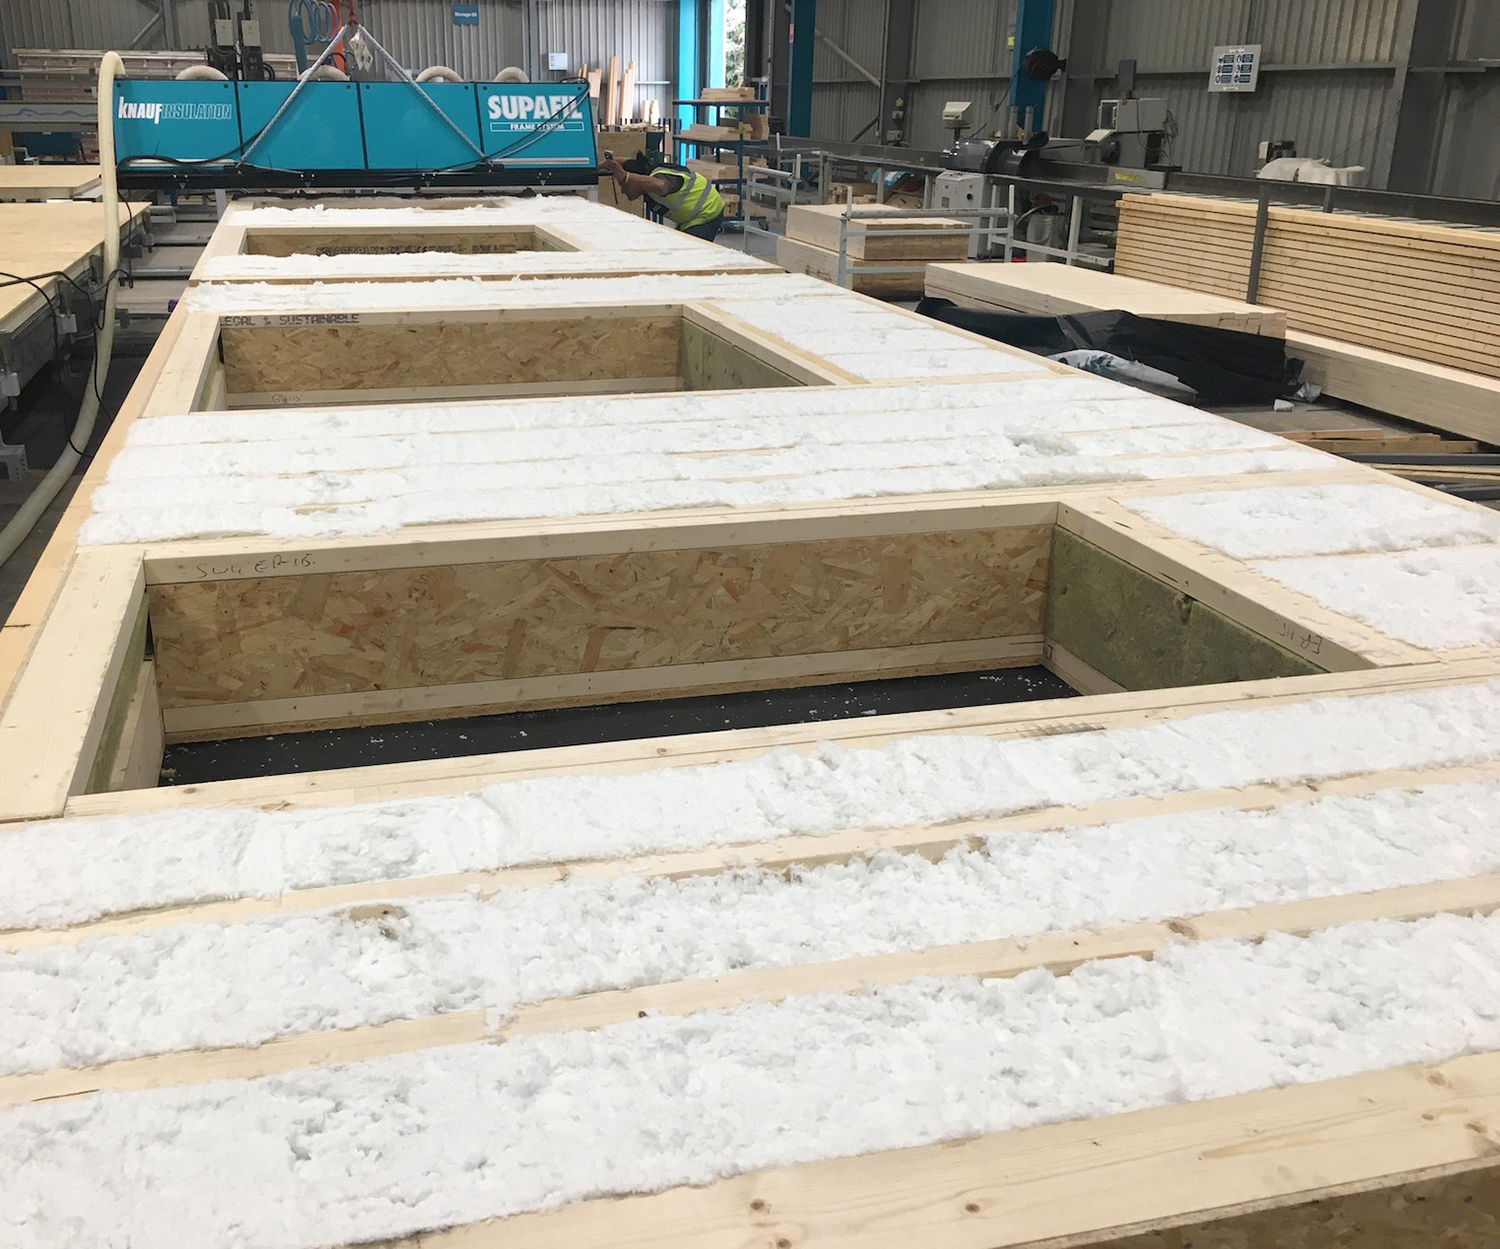 Knauf Insulation’s Blowing Plate Insulation System ensures that cavities are filled to the correct thickness